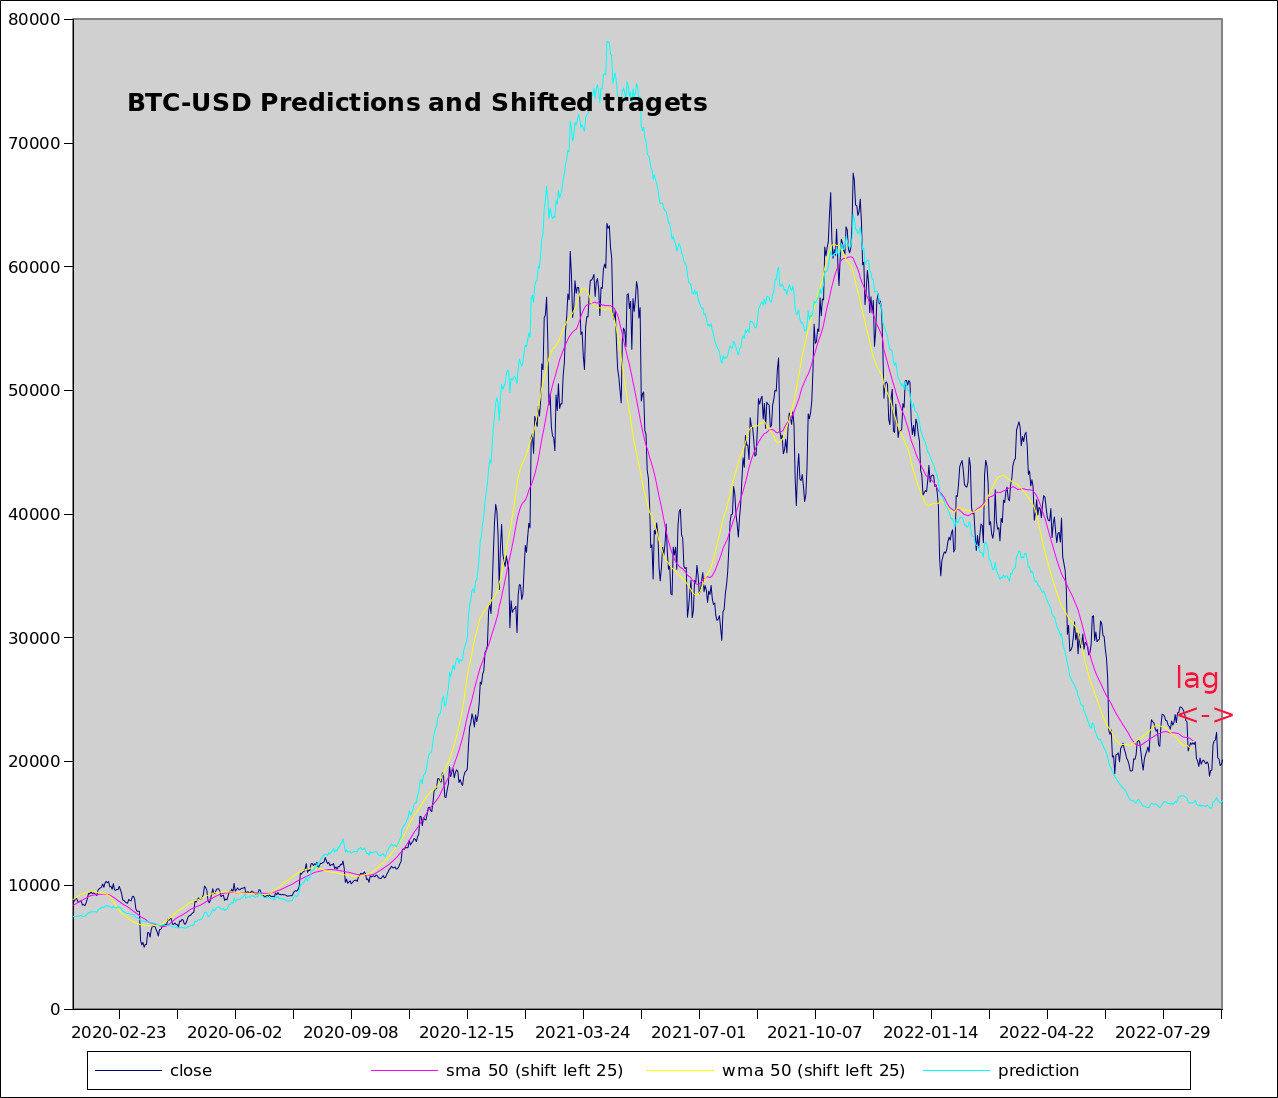 Price trend forecast chart of the BTC-USD based on technical analysis with no lag SMA and Weighted SMA 100.